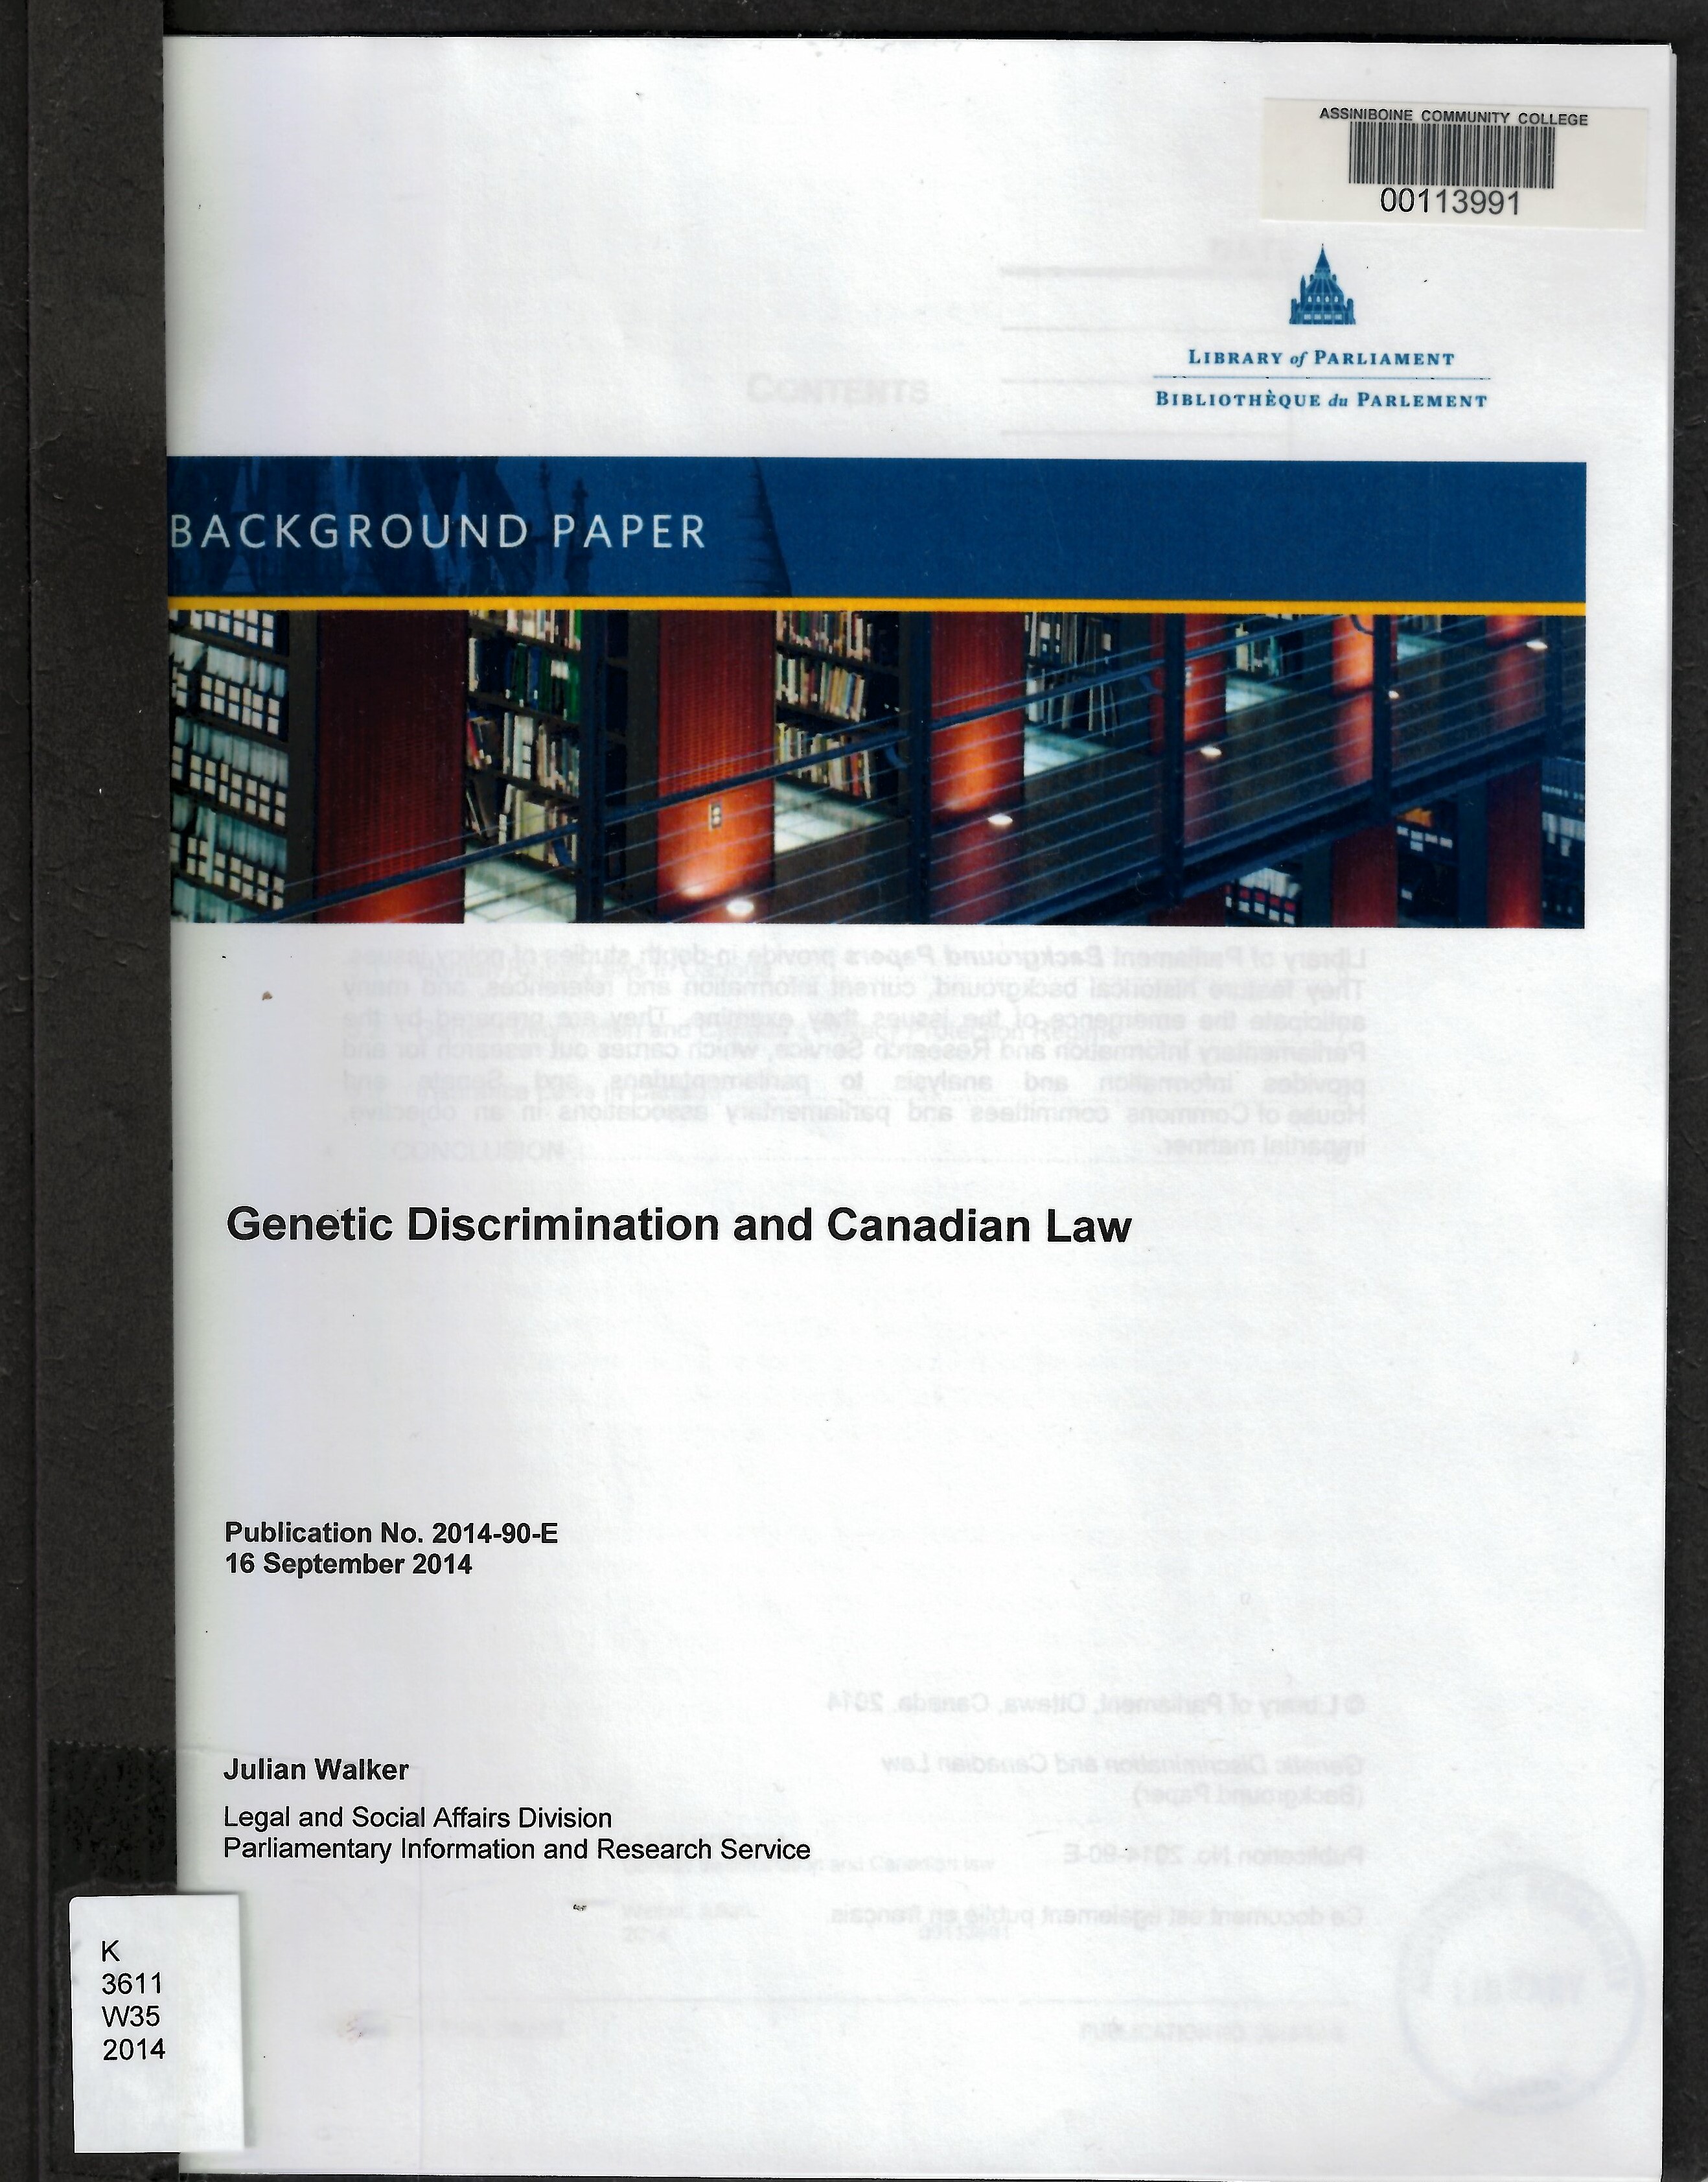 Genetic discrimination and Canadian law